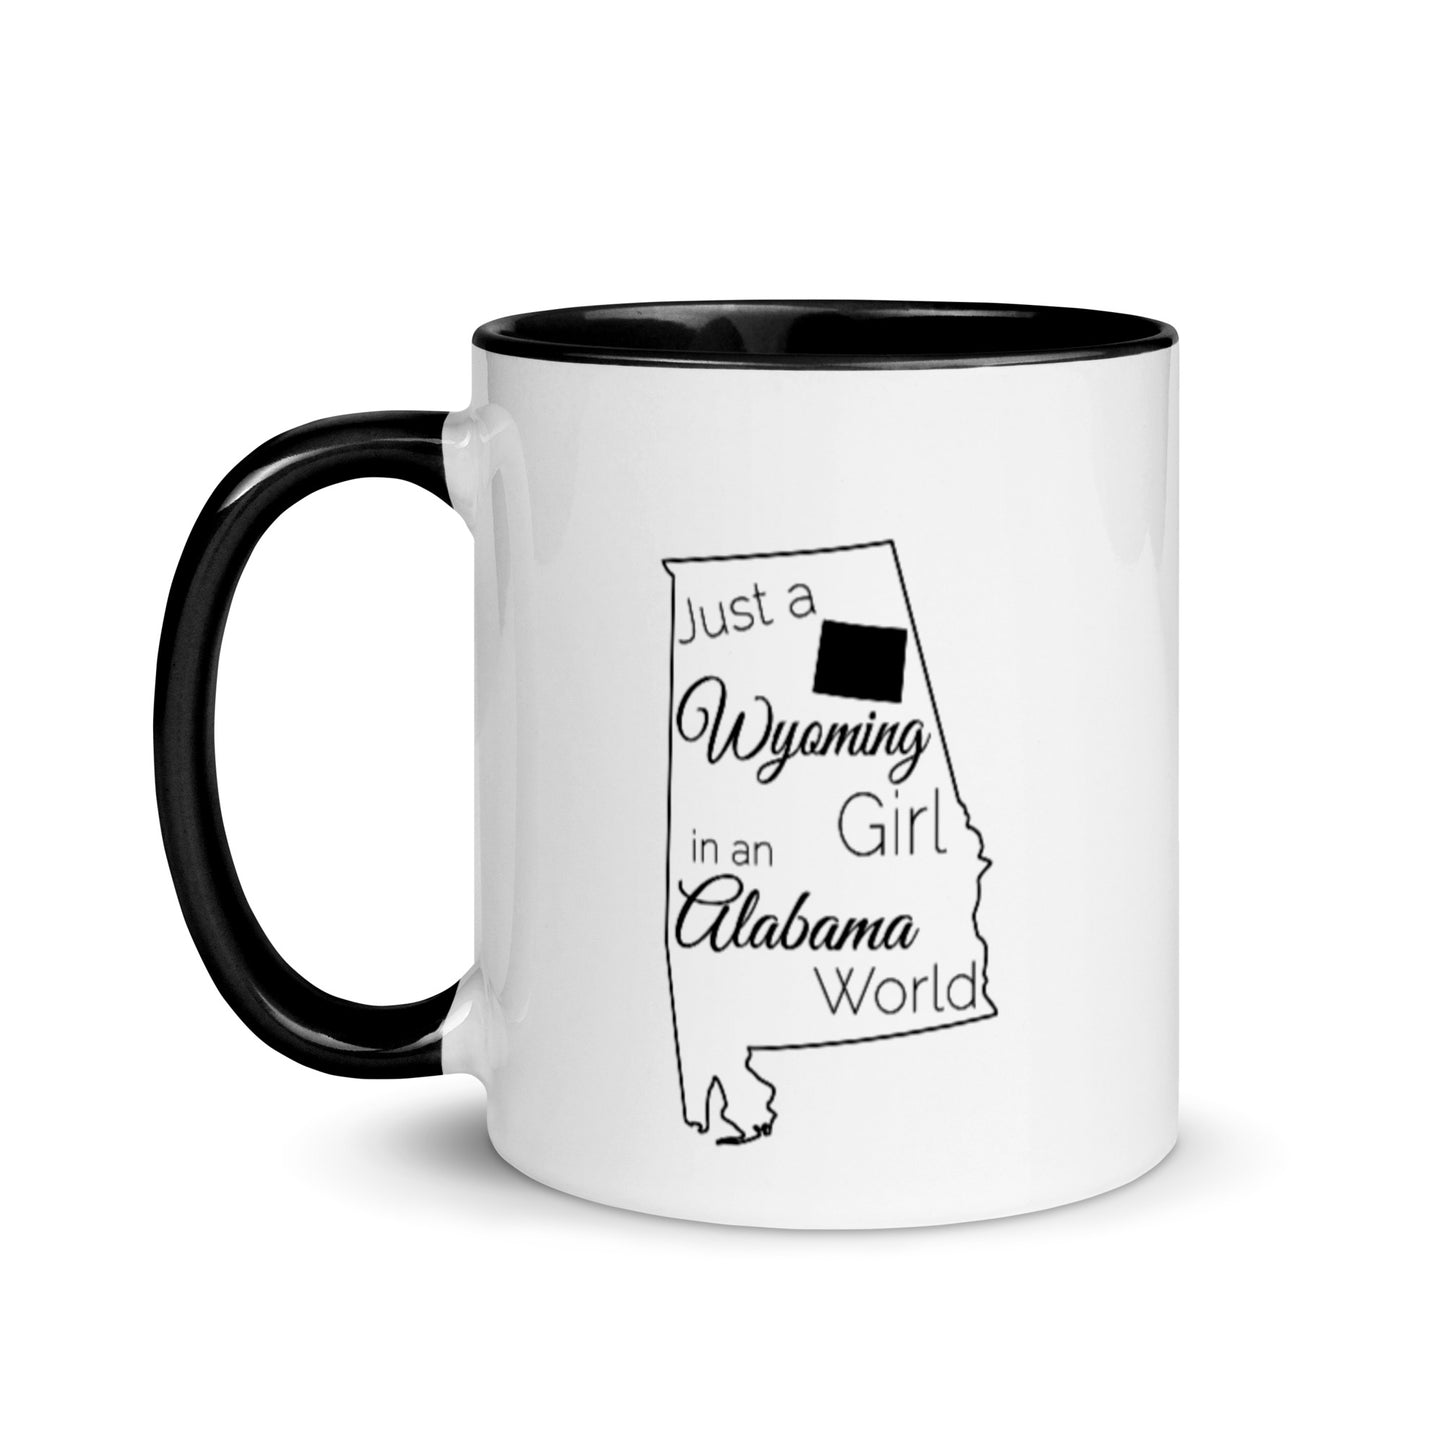 Just a Wyoming Girl in an Alabama World Mug with Color Inside